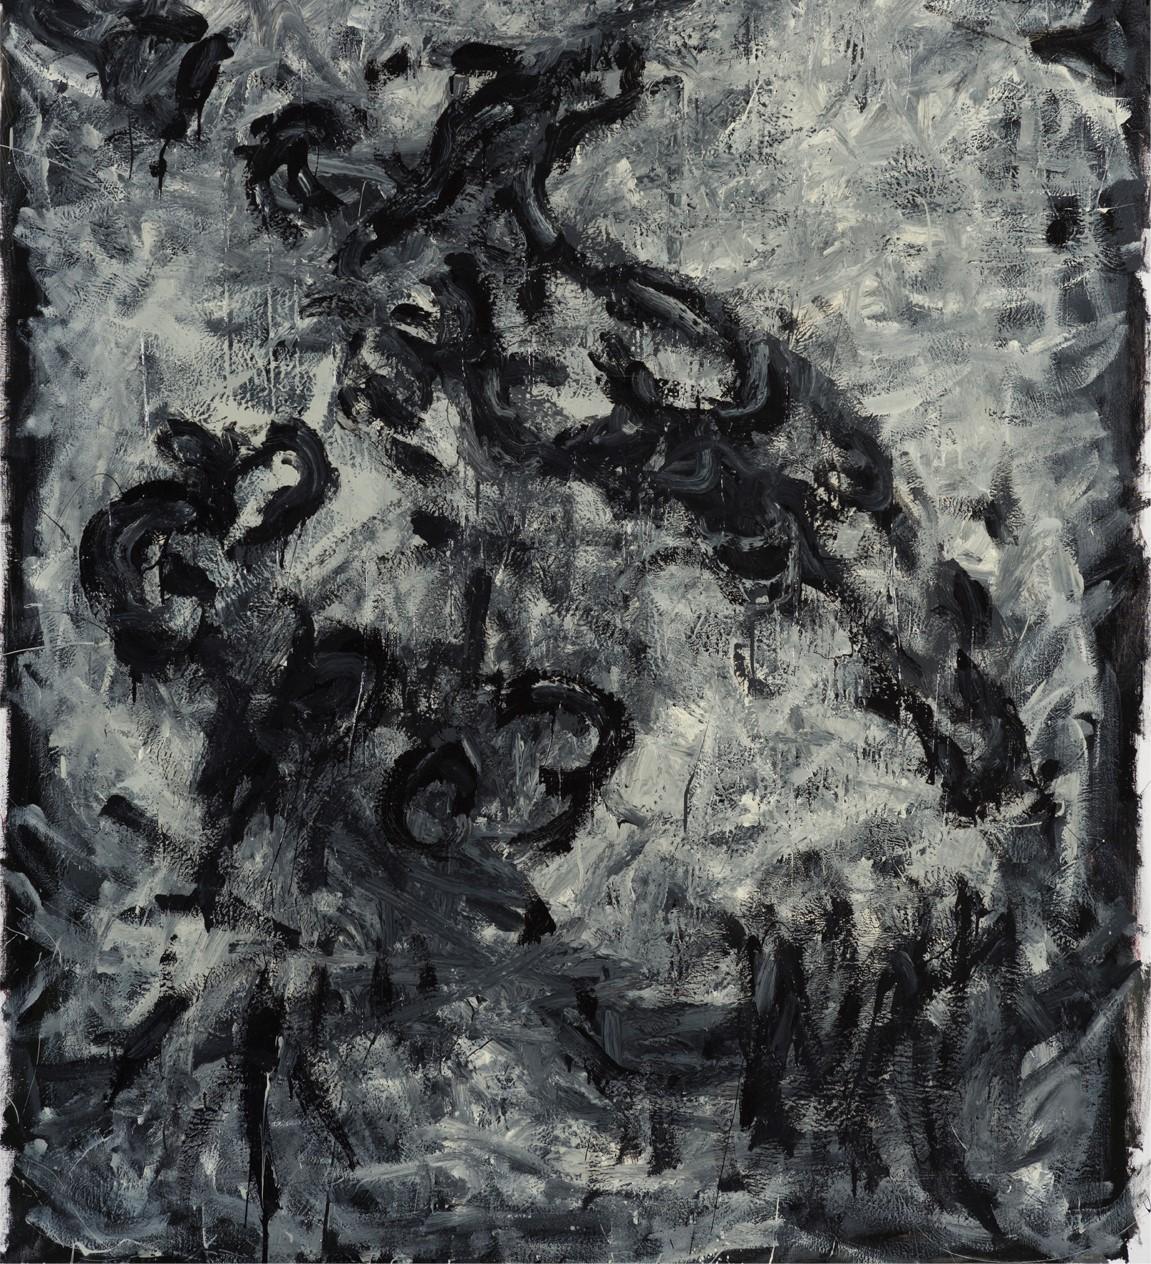 Untitled 09 [Remains of the Remains 09], 2018 - 2019
oil on canvas
78 47/64 H x 59 1/16 W in
200 H x 150 W cm

The large-sized paintings, signed by Zsolt Berszán, addresses the subject of death in terms of the remains of decaying bodies. The surface